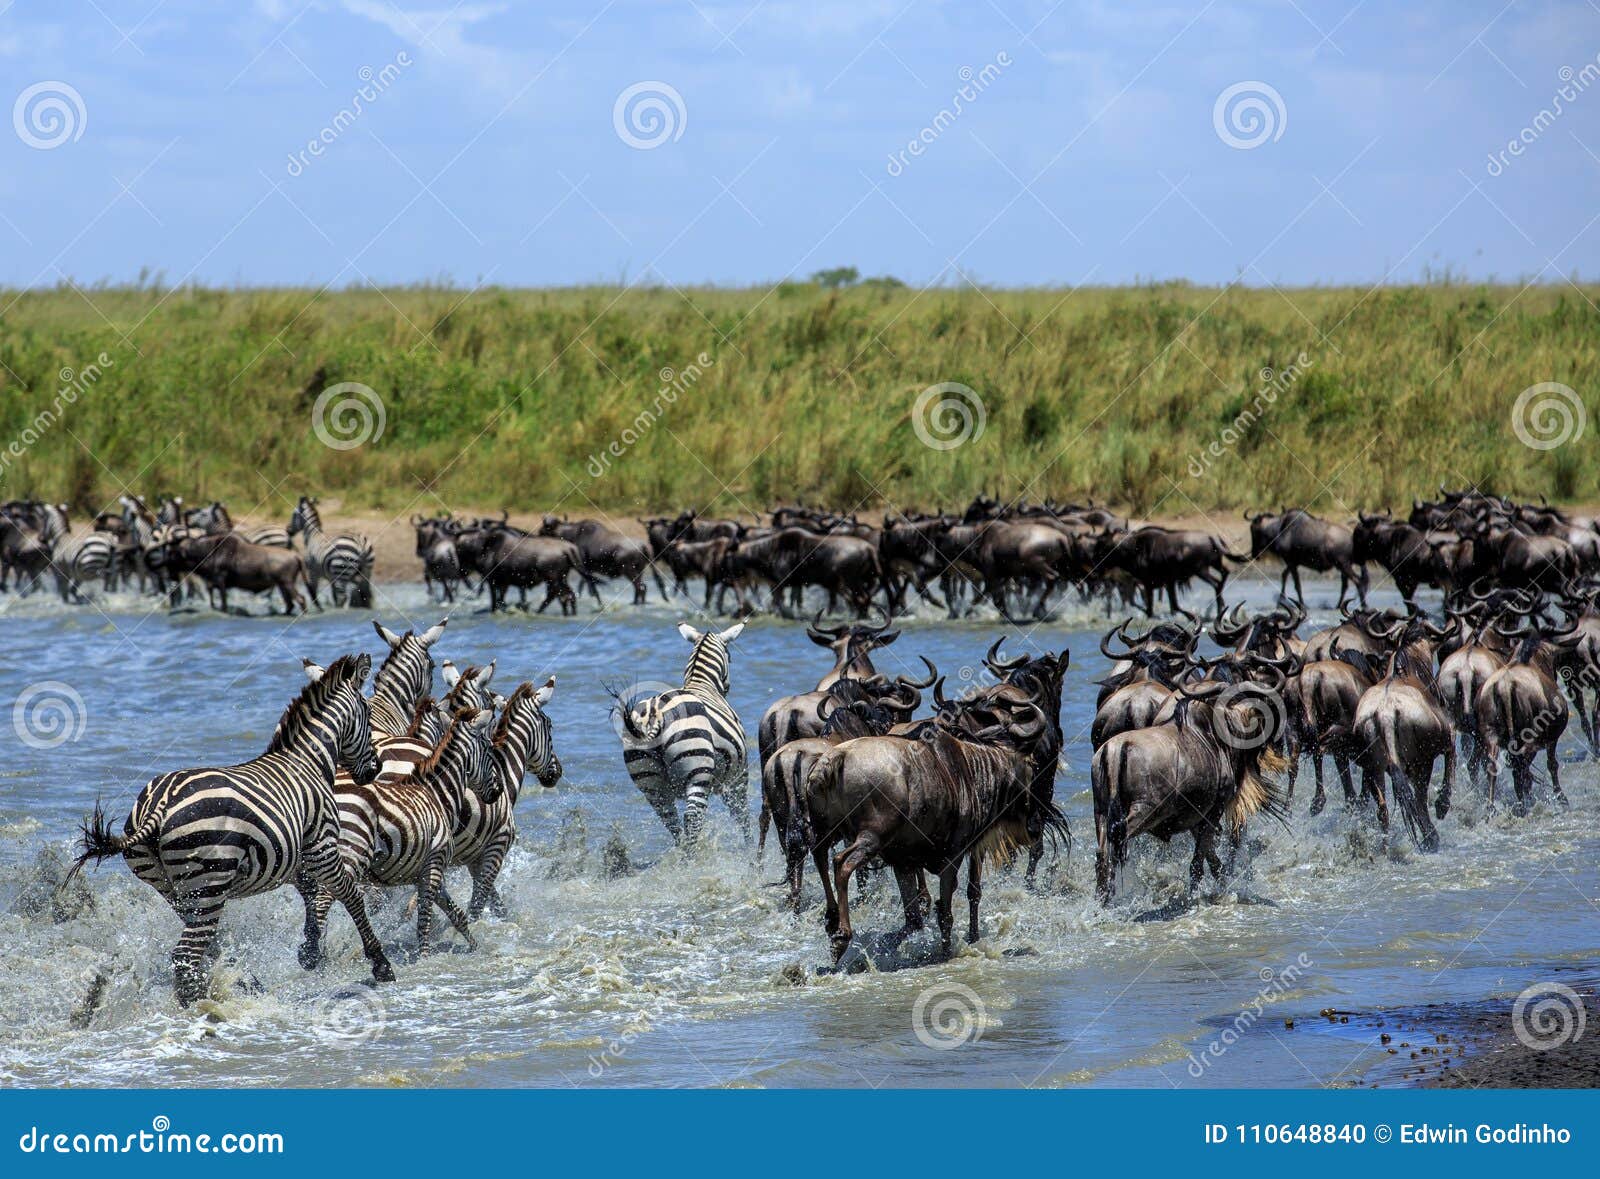 the great migration in the serengeti - wildebeest and zebras